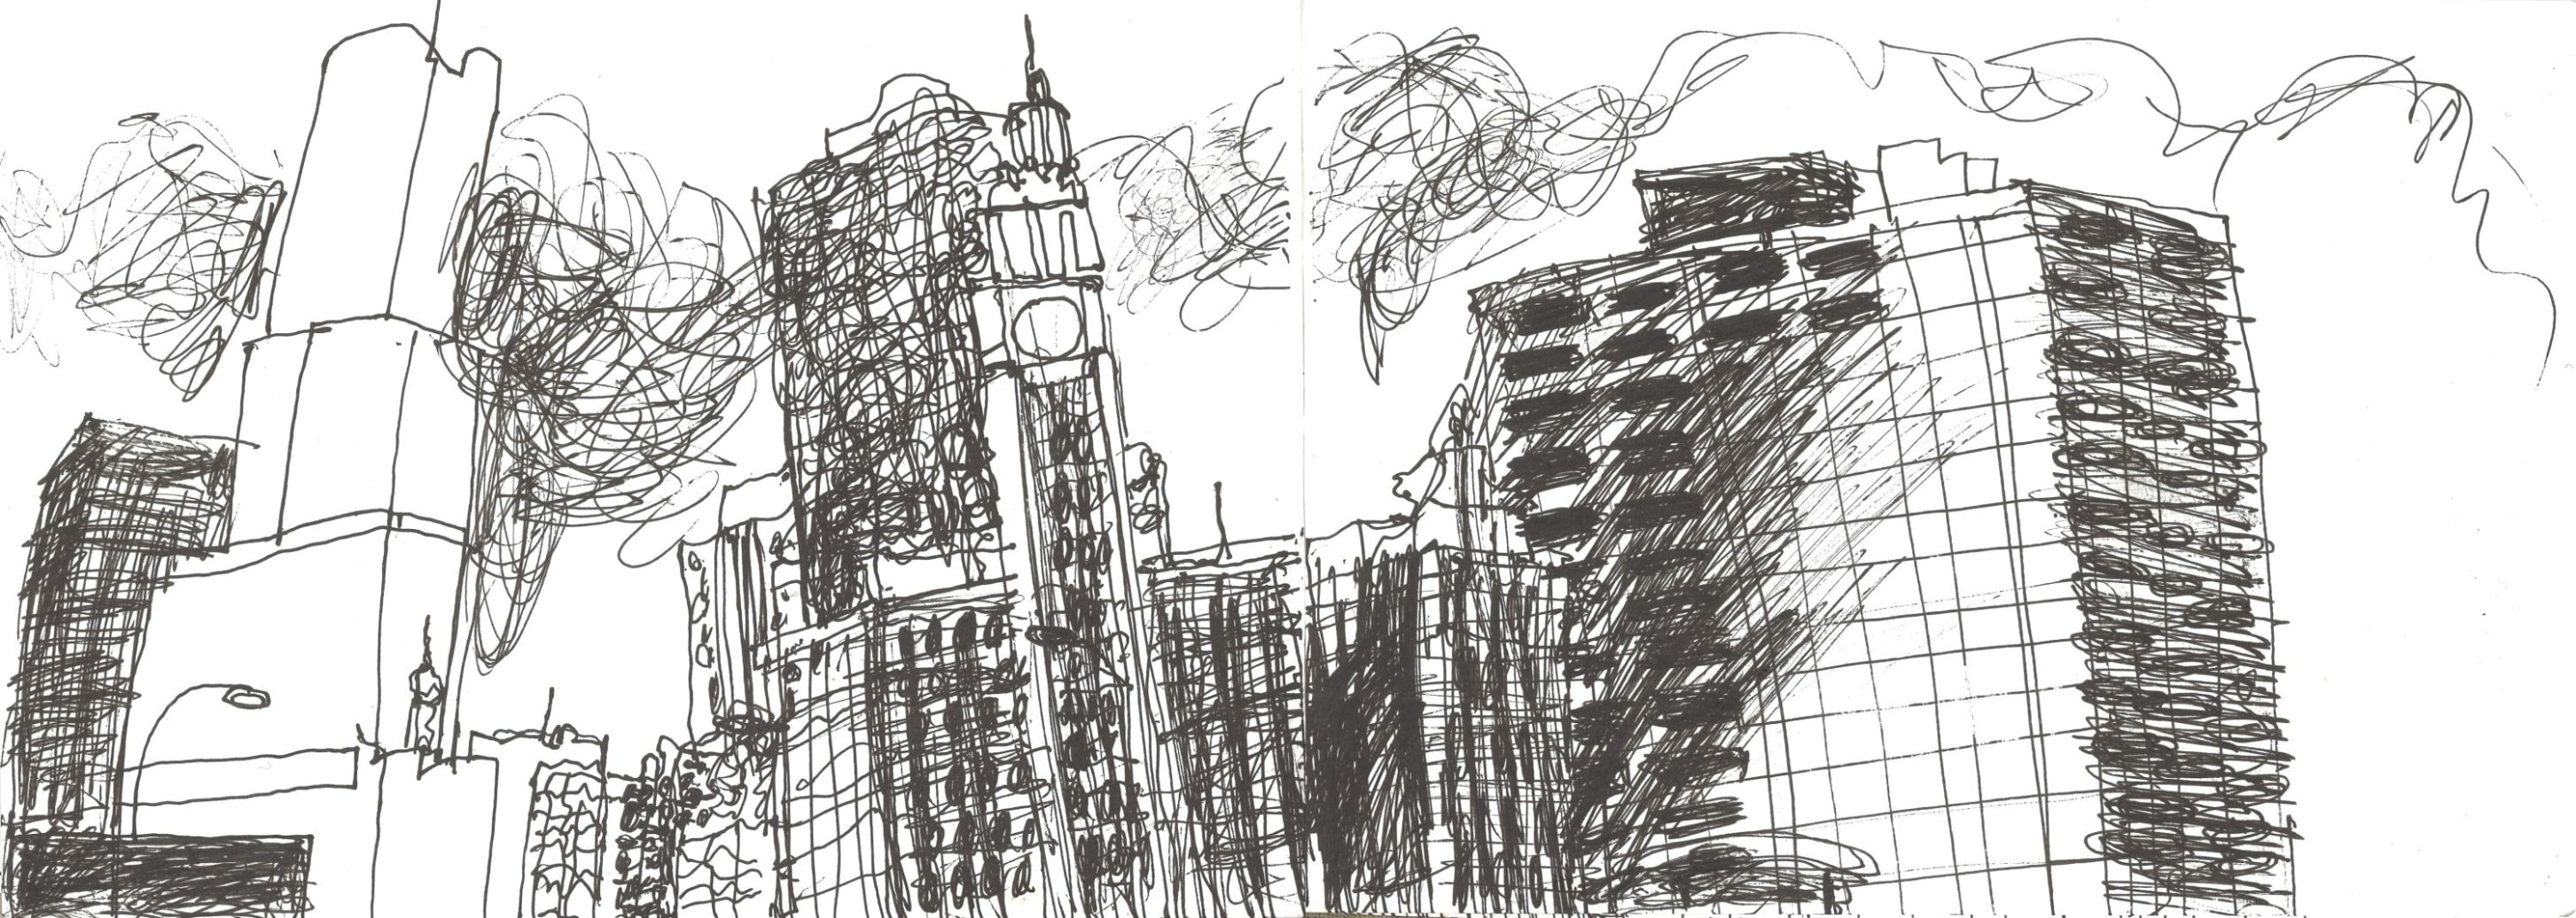 Sketch of skyscrapers in Chicago